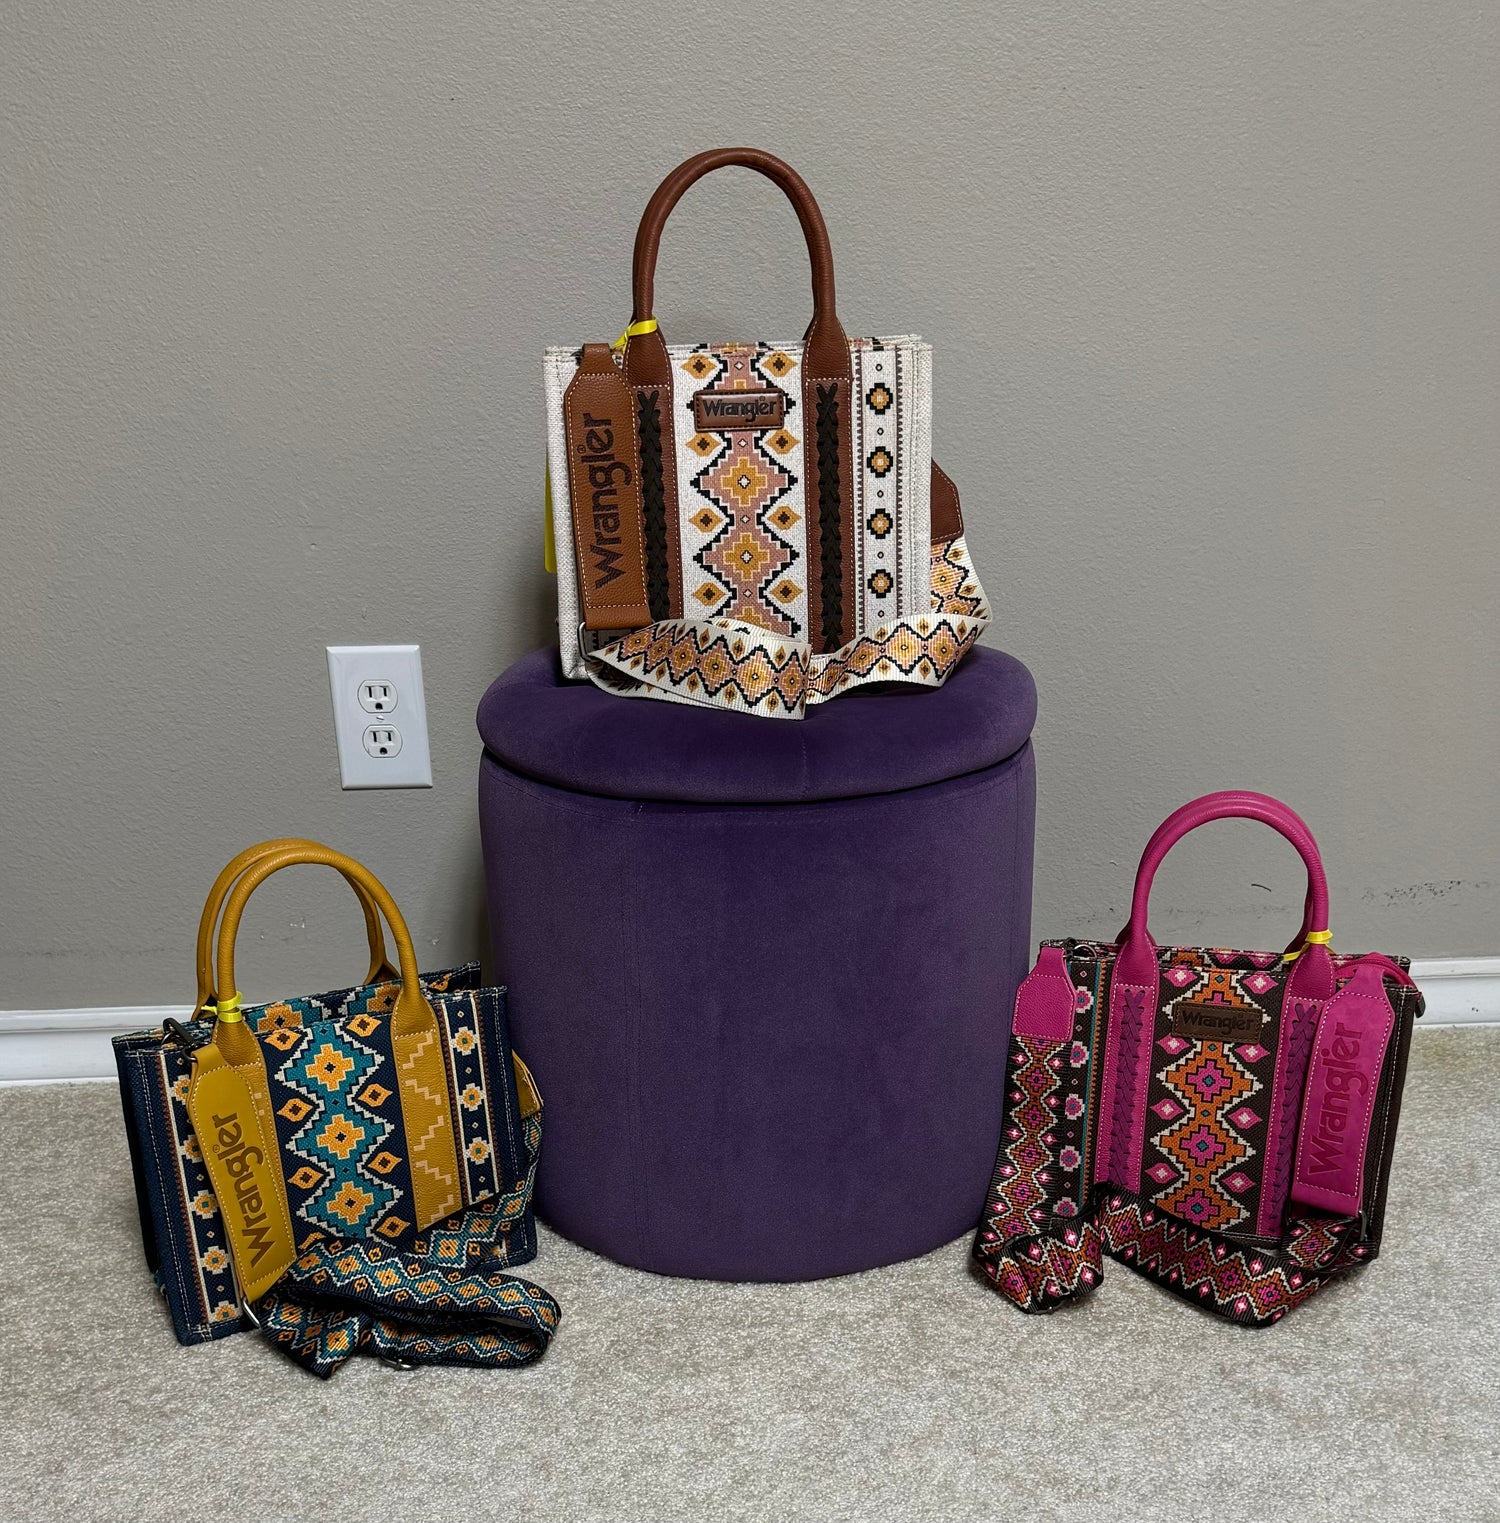 Purses and Accessories